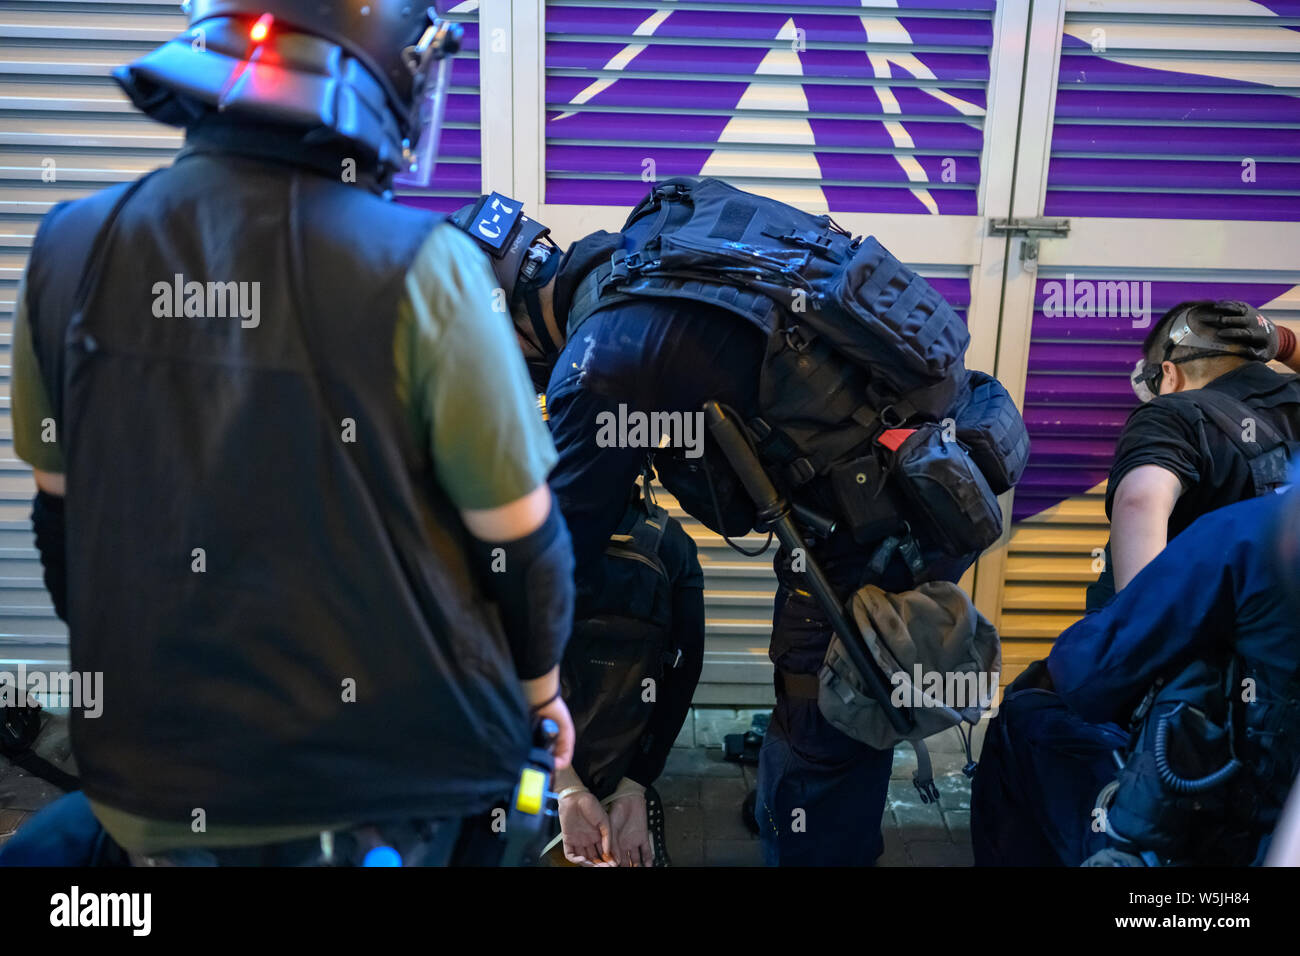 Hong Kong- 28 July 2019: Hong Kong public protest anti-extradition law in Hong Kong Island, which turn into Police conflict at night. Stock Photo